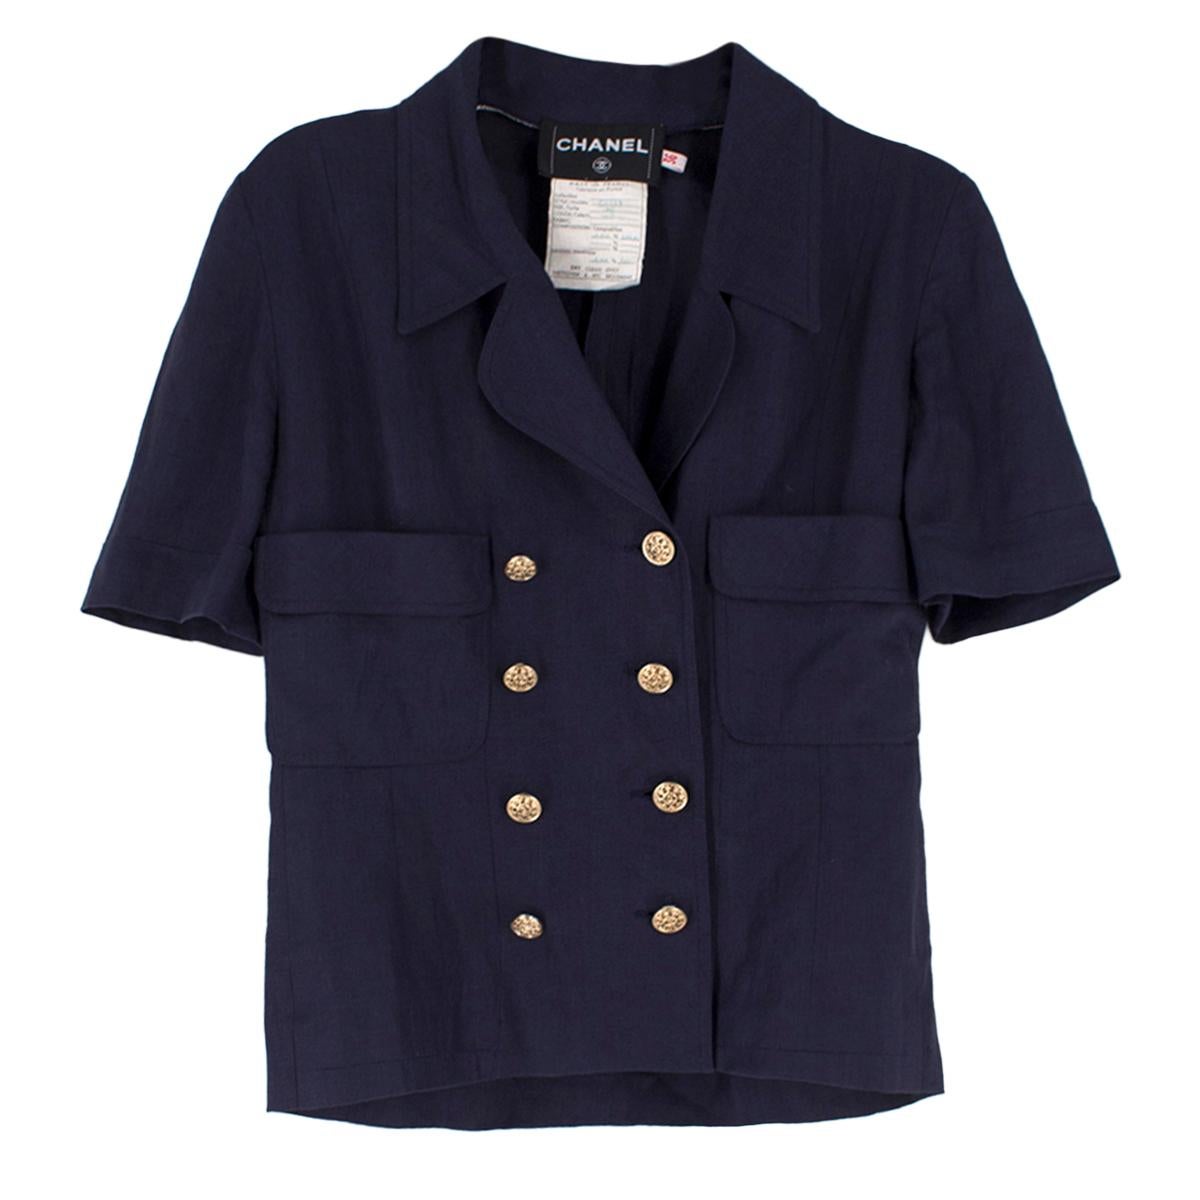 Chanel Navy Wool Short Sleeve Jacket

- Navy jacket
- Short sleeved
- Notch lapel, double breasted 
- Gold toned buttons 
- Decorative side flap pockets
- Unlined

Please note, these items are pre-owned and may show some signs of storage, even when